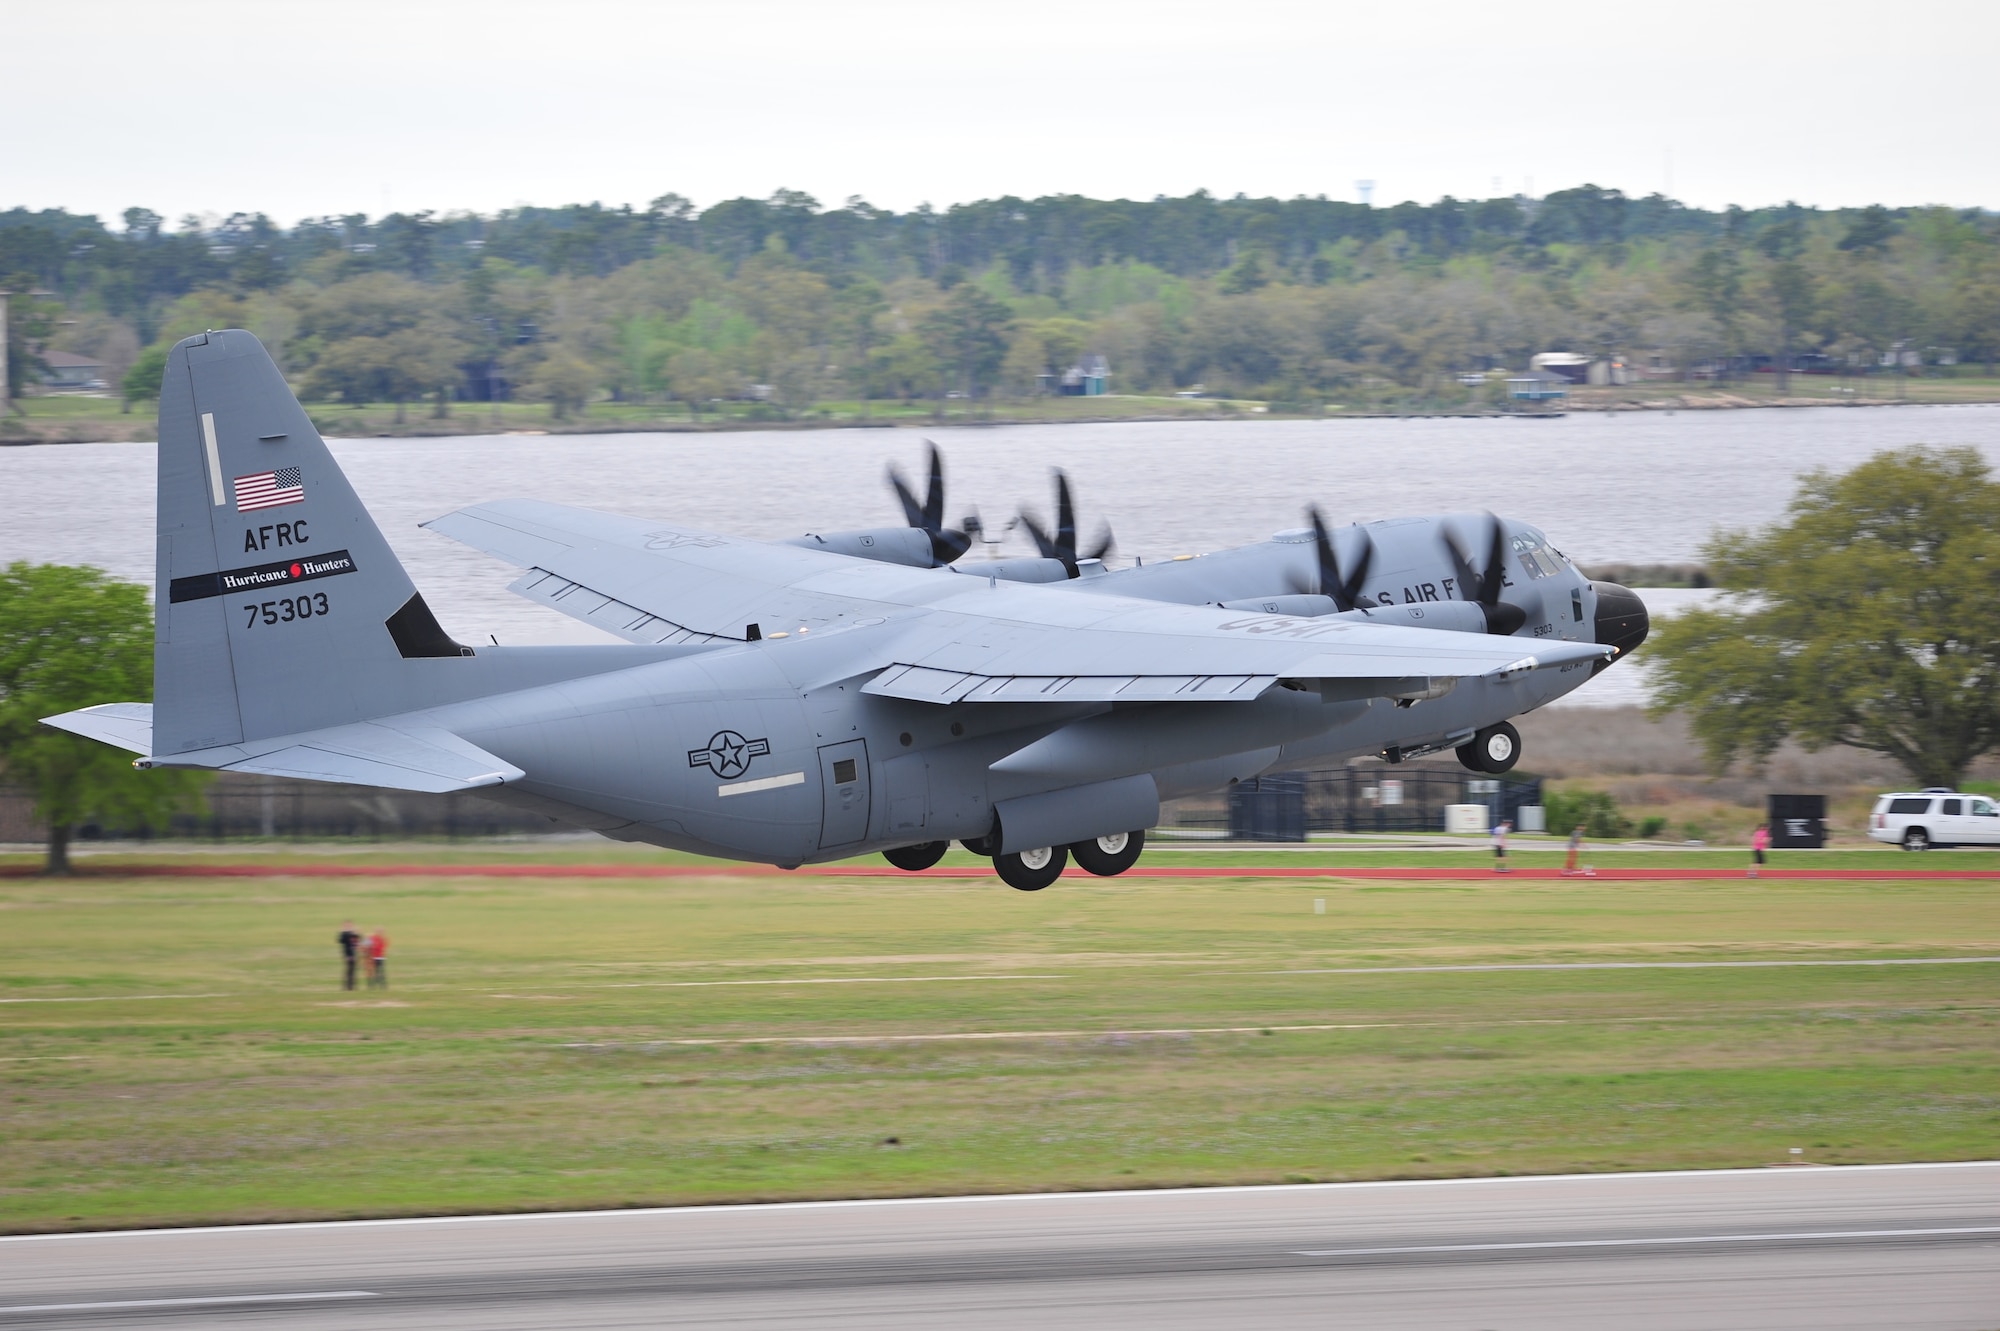 A WC-130J from the 53rd Weather Reconnaissance Squadron takes off in support of Operation Surge Capacity here April 5, 2014.  Sixteen aircraft from the 403rd Wing took part in Operation Surge Capacity, a large scale training exercise designed to test the 403rd Wing's ability to launch and recover a large formation of aircraft and to execute airdrops. (U.S. Air Force photo/Tech. Sgt. Ryan Labadens)